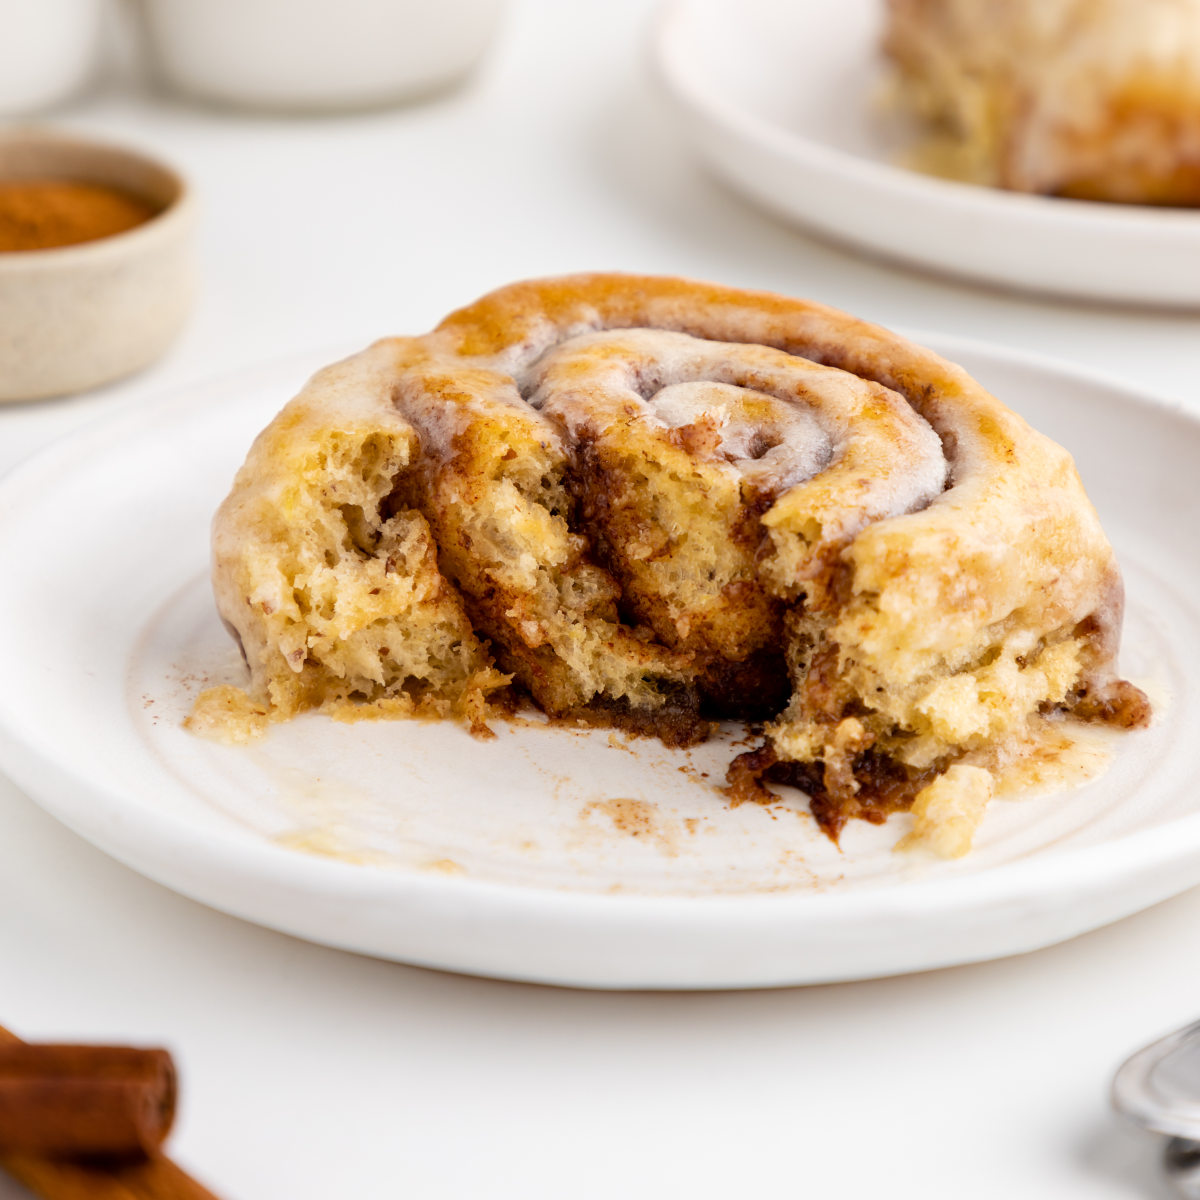 A vegan cinnamon roll on a plate with a few bites missing to show the inside.